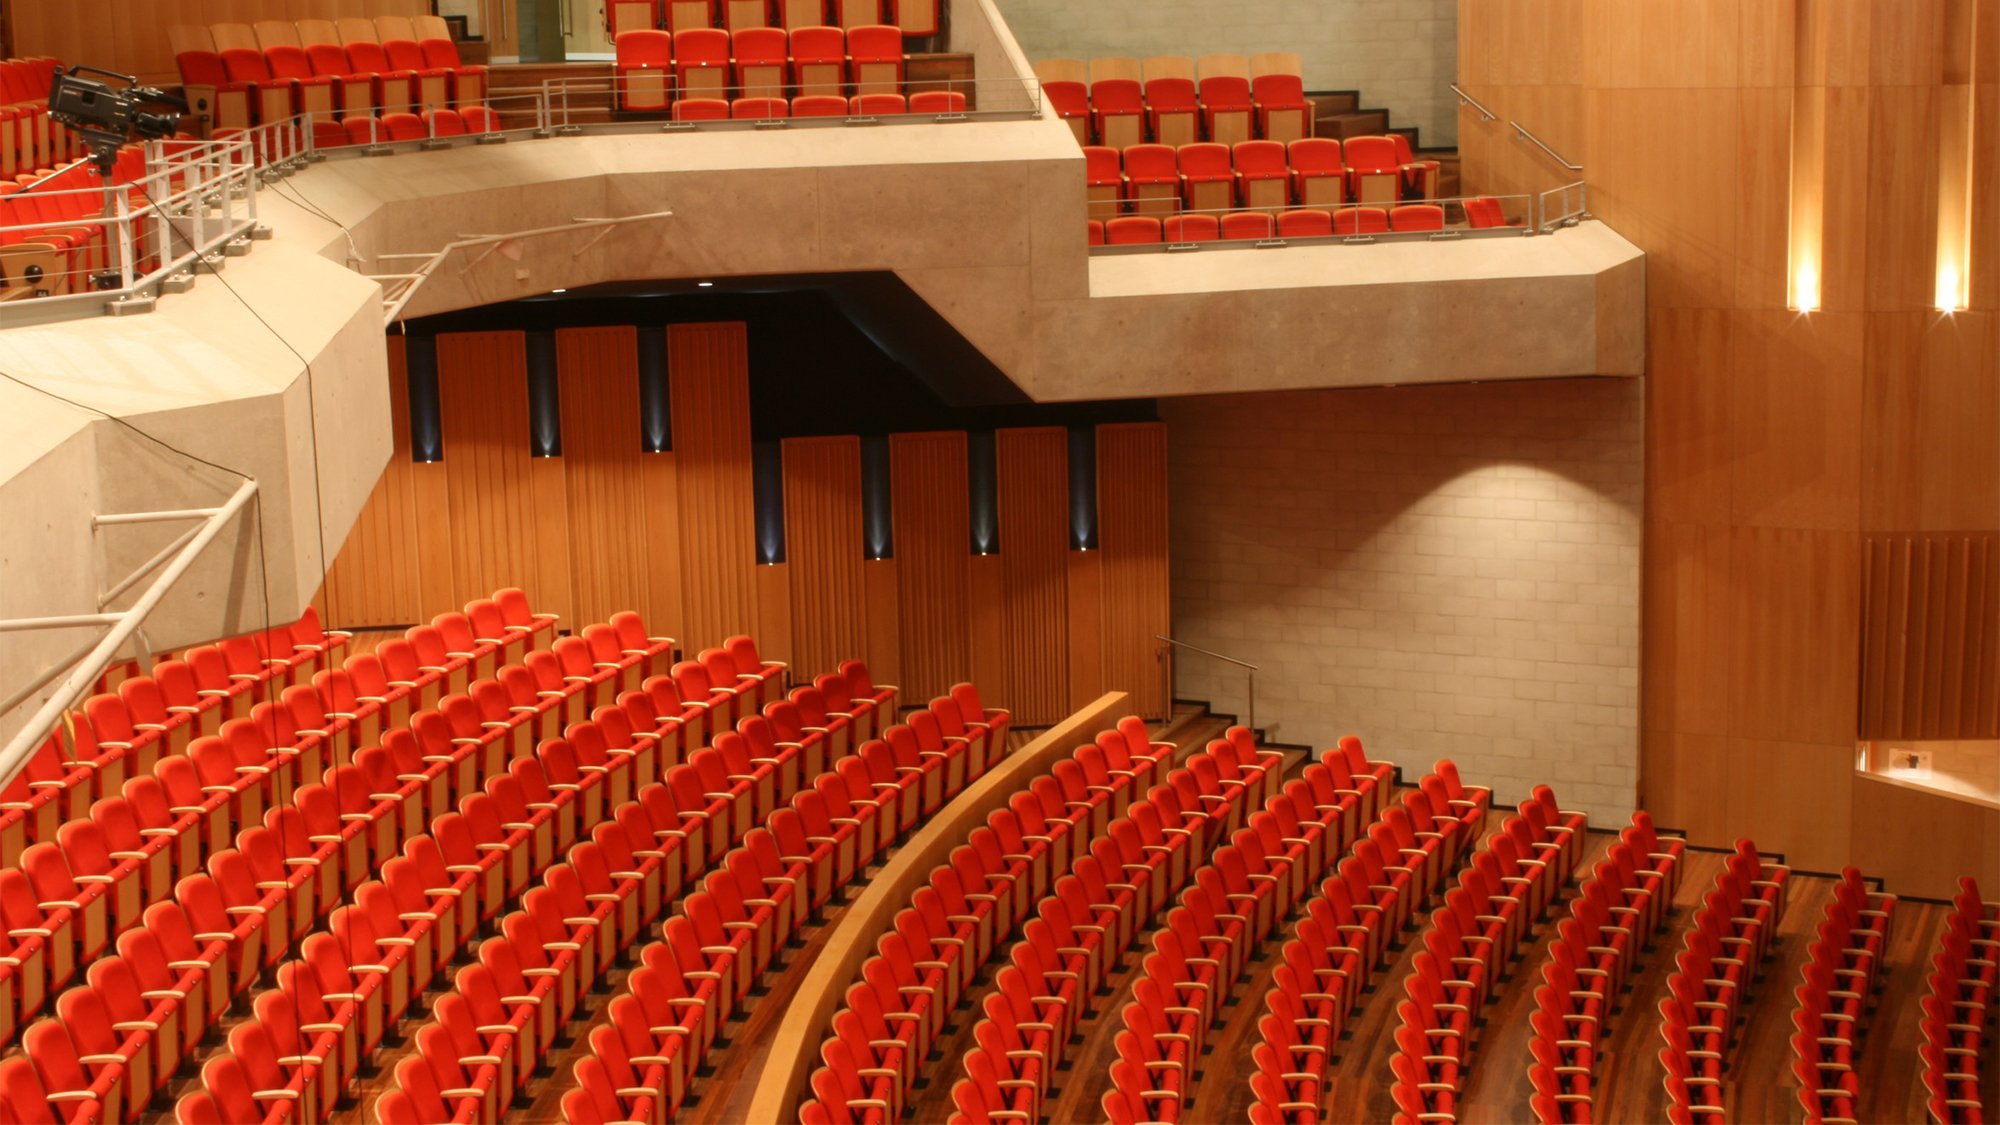 The refurbishment of the Llewellyn Concert Hall in Canberra, home to the School of Music at Australian National University and a regular venue for the Canberra Symphony Orchestra.